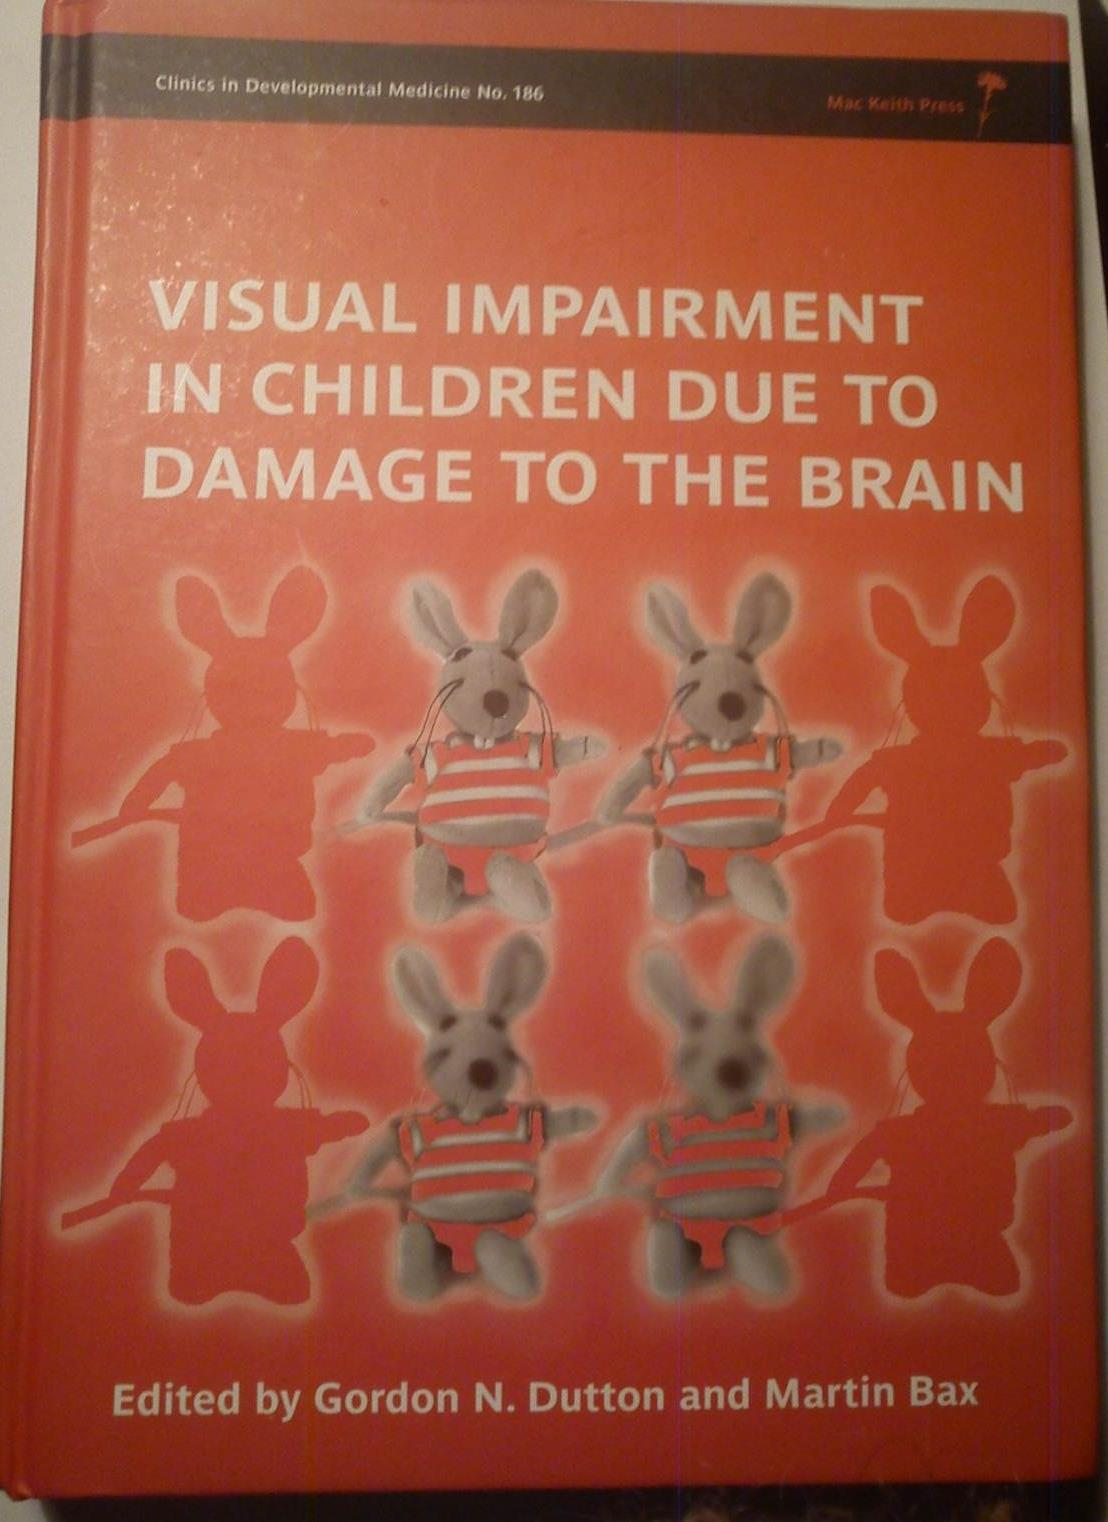 Litteratur: Visual impairment in children due to damage to the brain Edited by Gordon N